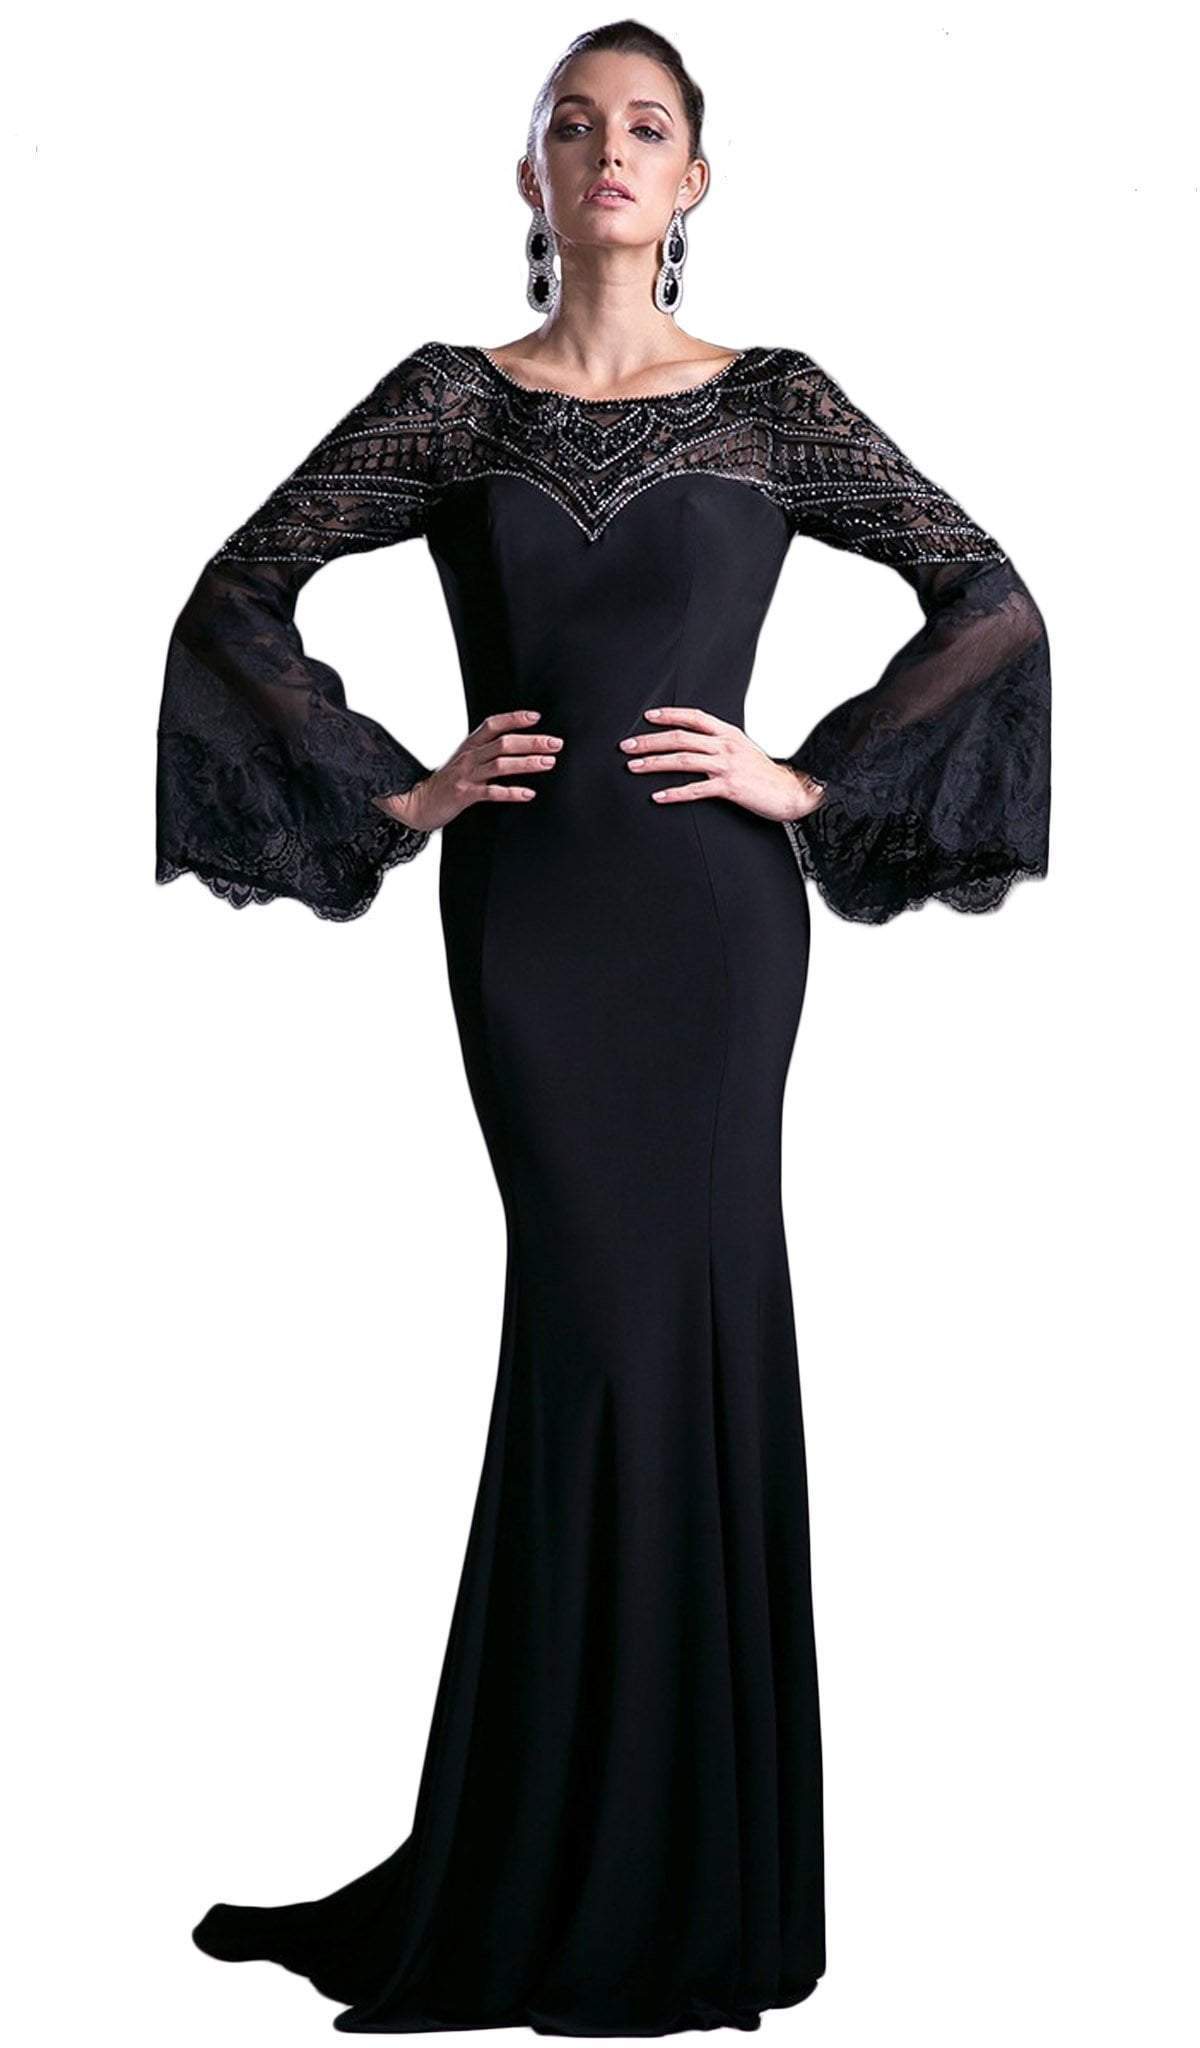 Cinderella Divine - Sheer Long Bell Sleeves Sheath Evening Gown Special Occasion Dress 2 / Black